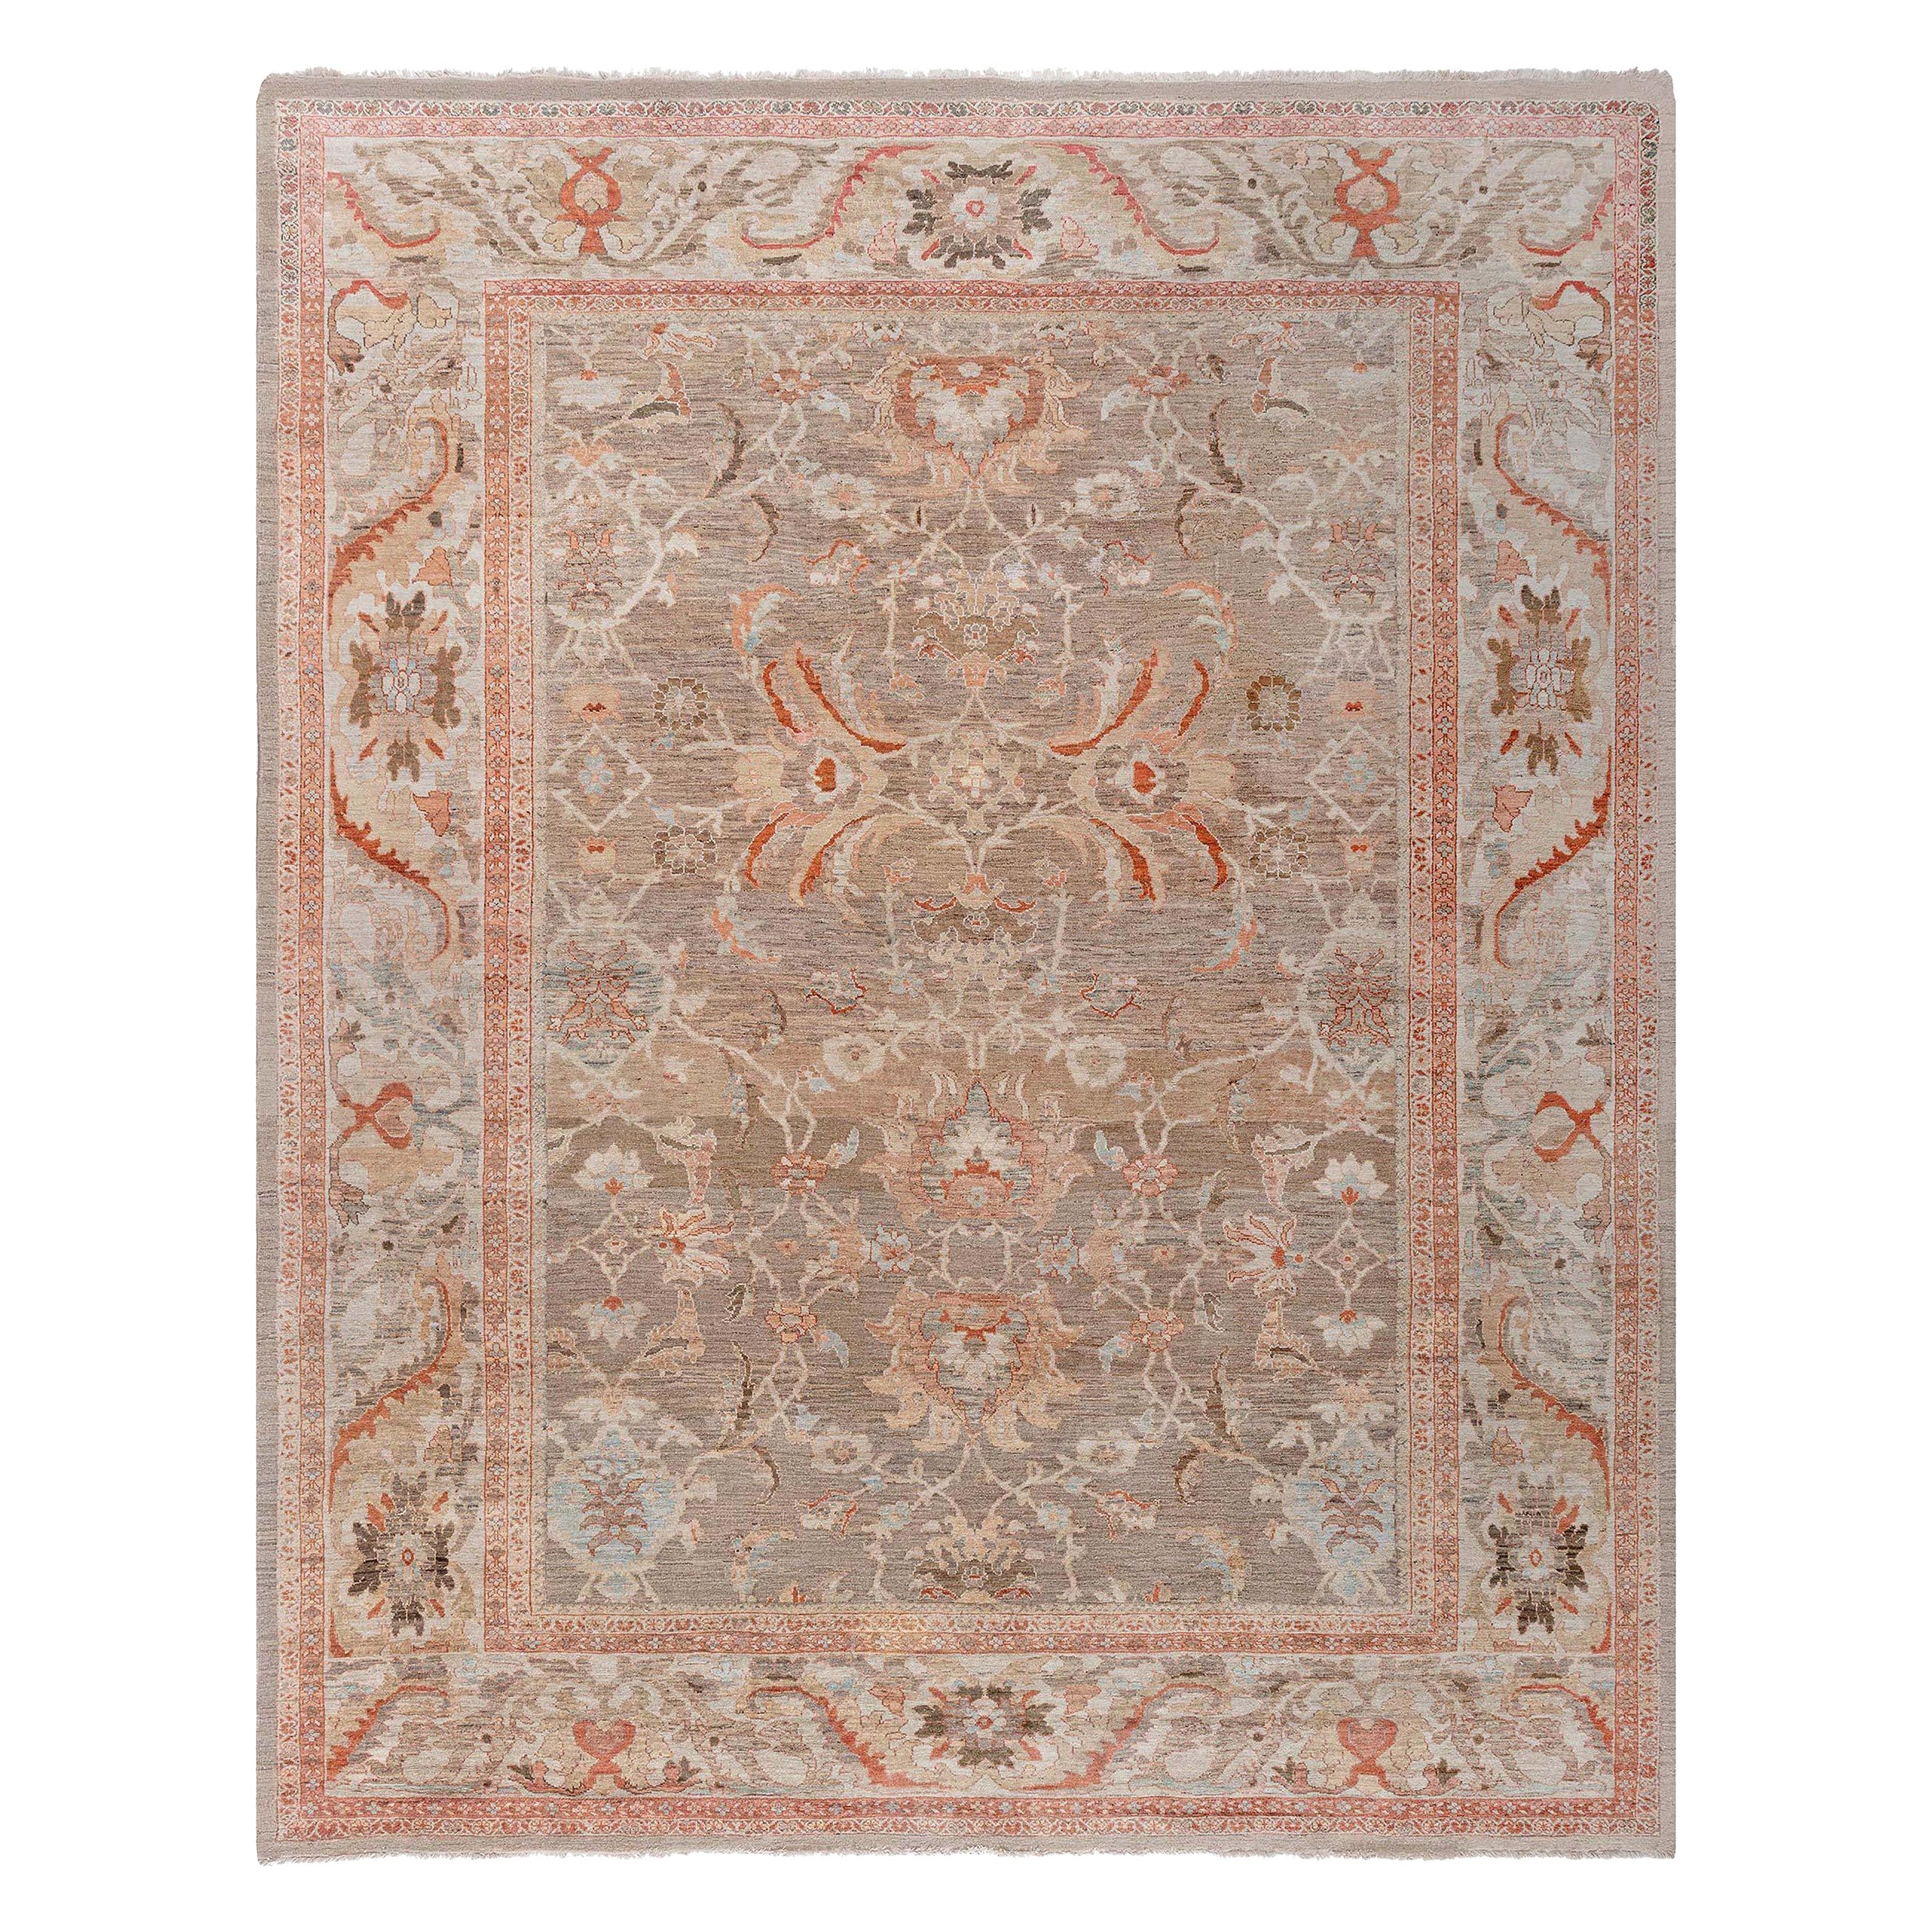 Traditional Inspired Sultanabad Rug by Doris Leslie Blau